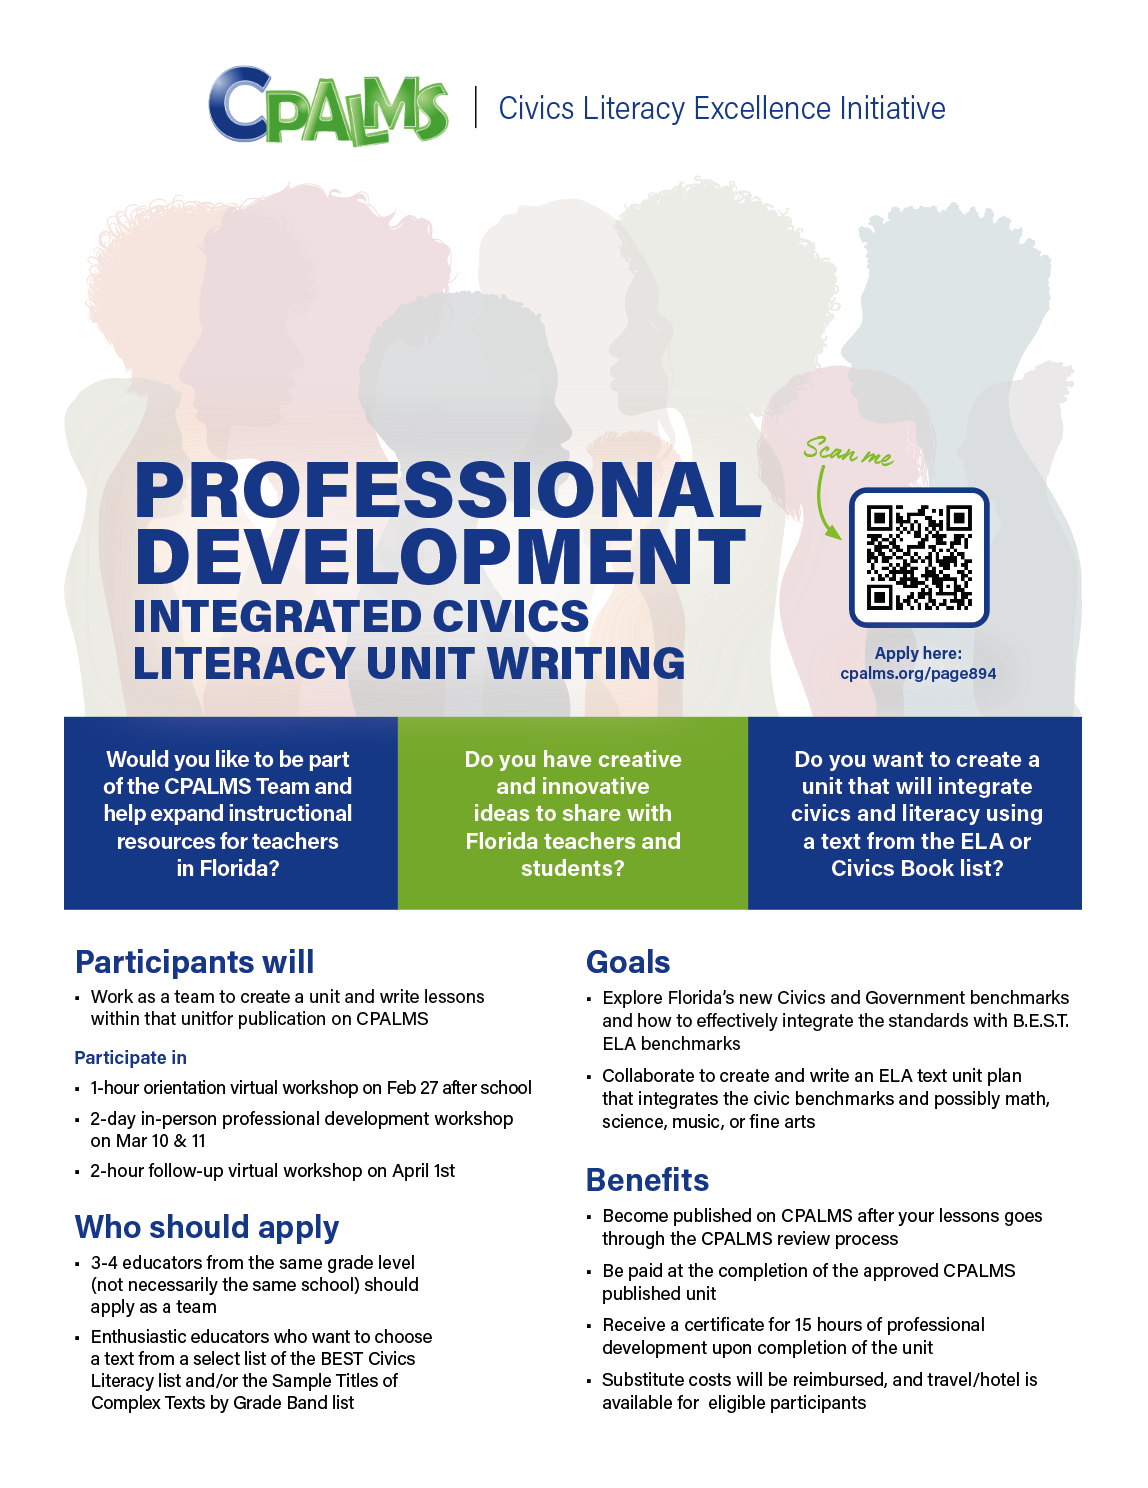 "Infographic with "Professional Development 𝐈𝐧𝐭𝐞𝐠𝐫𝐚𝐭𝐞𝐝 𝐂𝐢𝐯𝐢𝐜𝐬 𝐋𝐢𝐭𝐞𝐫𝐚𝐜𝐲 𝐔𝐧𝐢𝐭 𝐖𝐫𝐢𝐭𝐢𝐧𝐠" written in large font at the top. Shadow silhouettes  in different colors in the middle, three text boxes below and the CPALMS logo at the bottom."